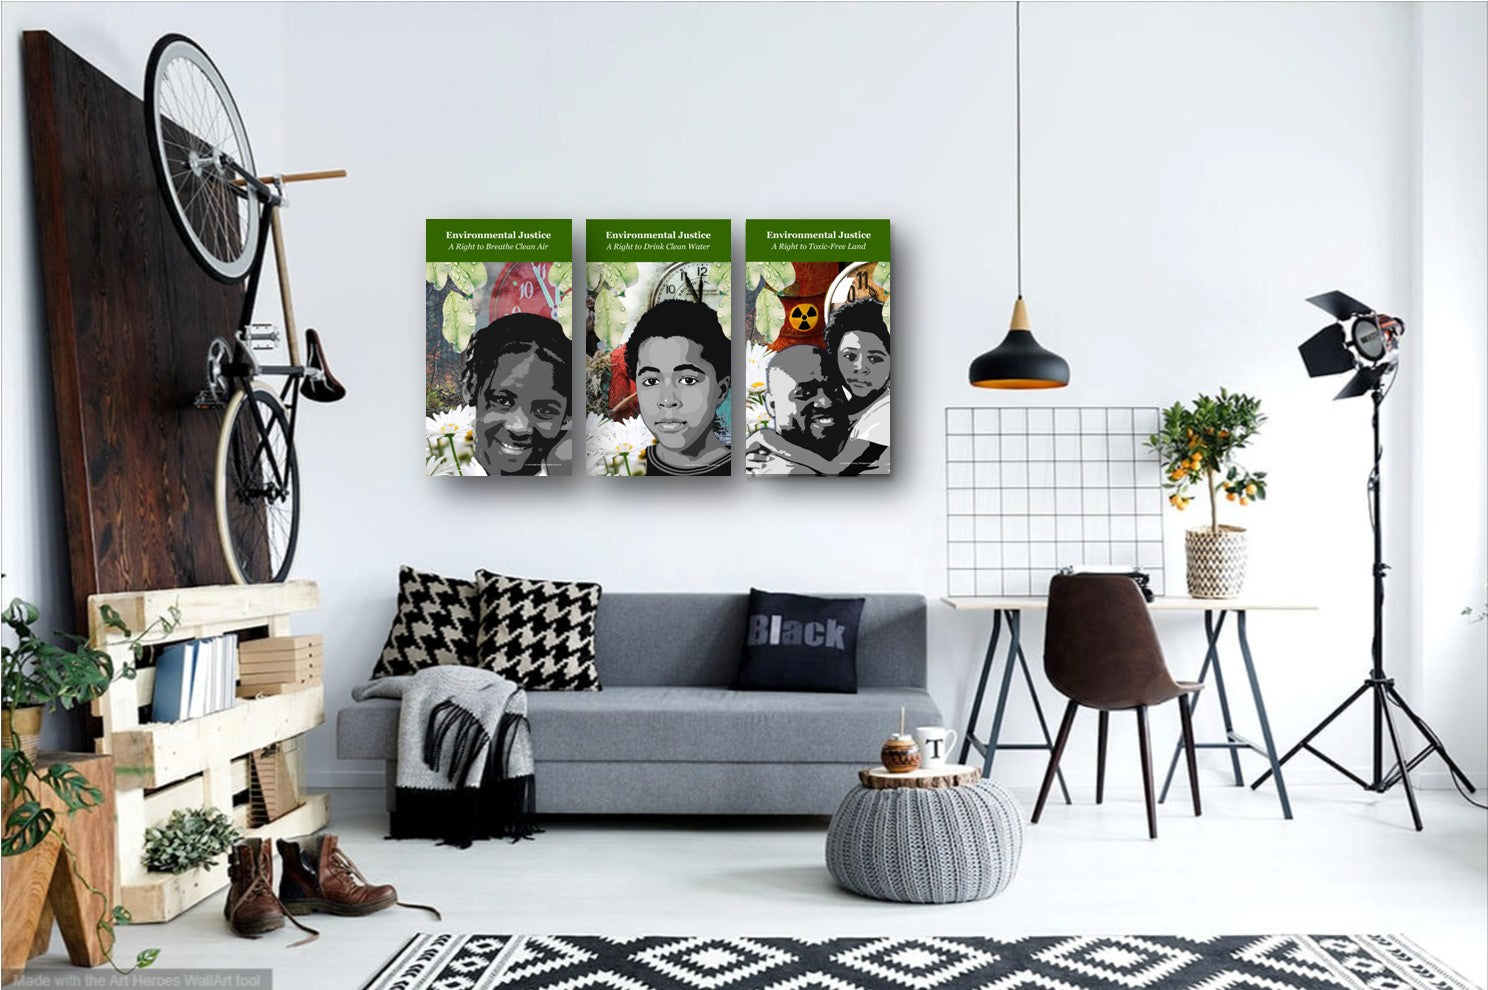 A living room setting with a sofa and three pillows. A black pendant light hangs from the ceiling. Three environmental justice posters are hung on the wall above the sofa. The poster focus on air, water and land pollution.